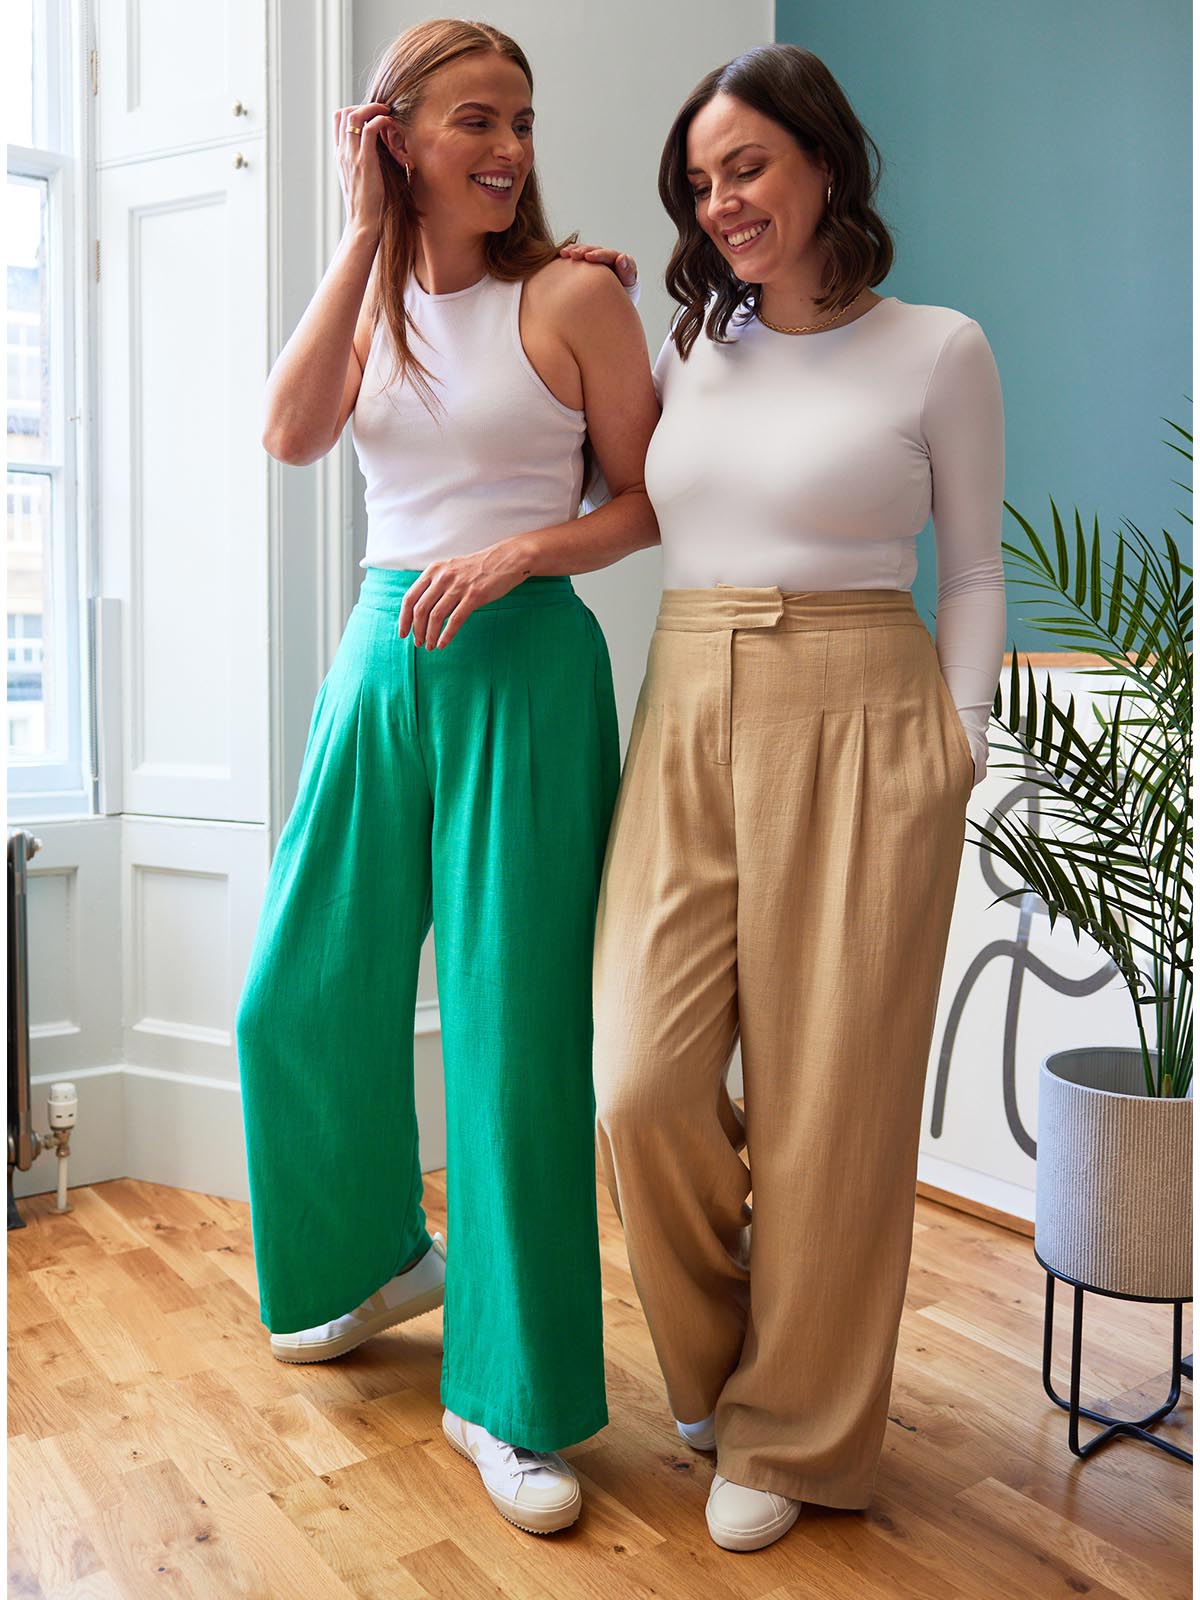 Two models, both wearing the Lana trousers - one in sand and the other in green. Both models are smiling and looking in different directions.